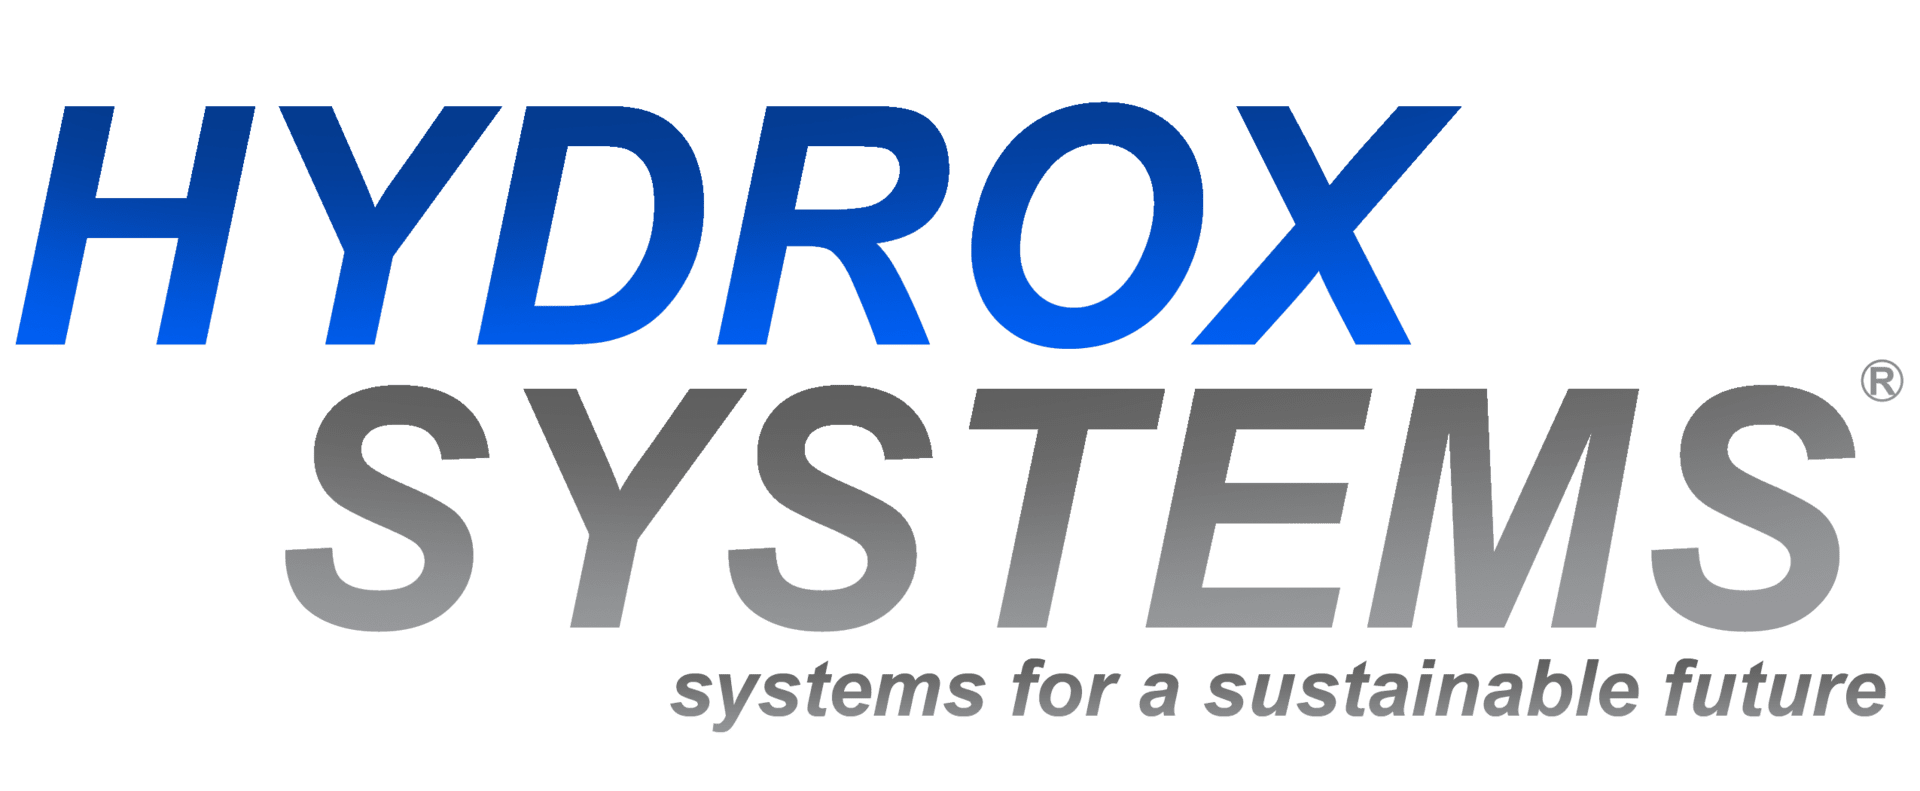 Hydrogen System made by Hydrox Systems